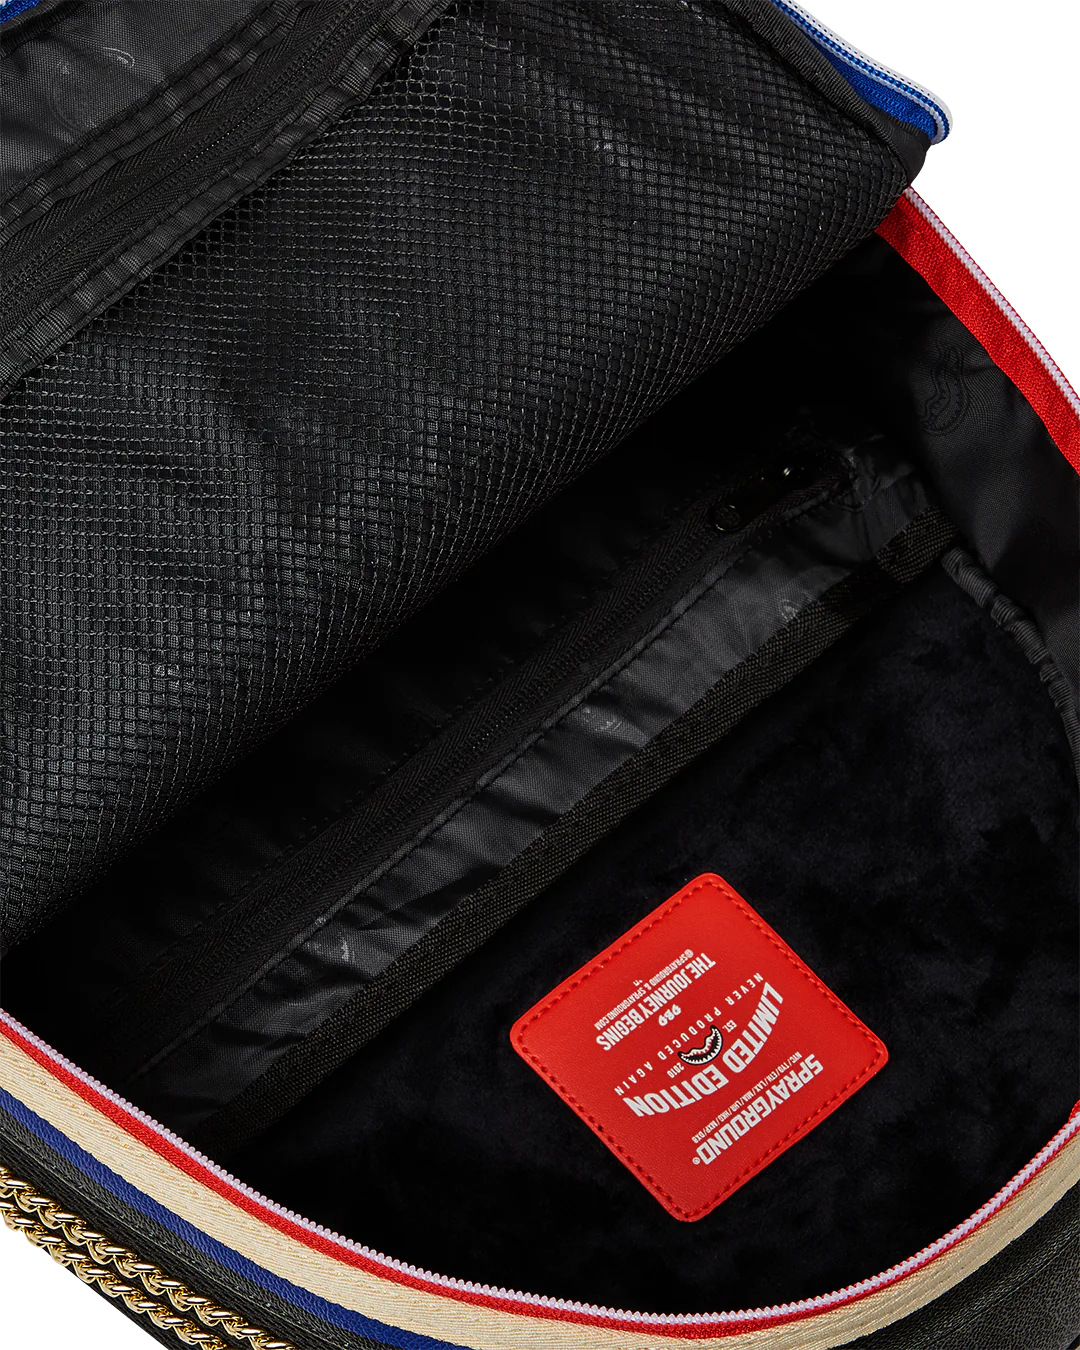 sprayground limited edition backpack never produced again